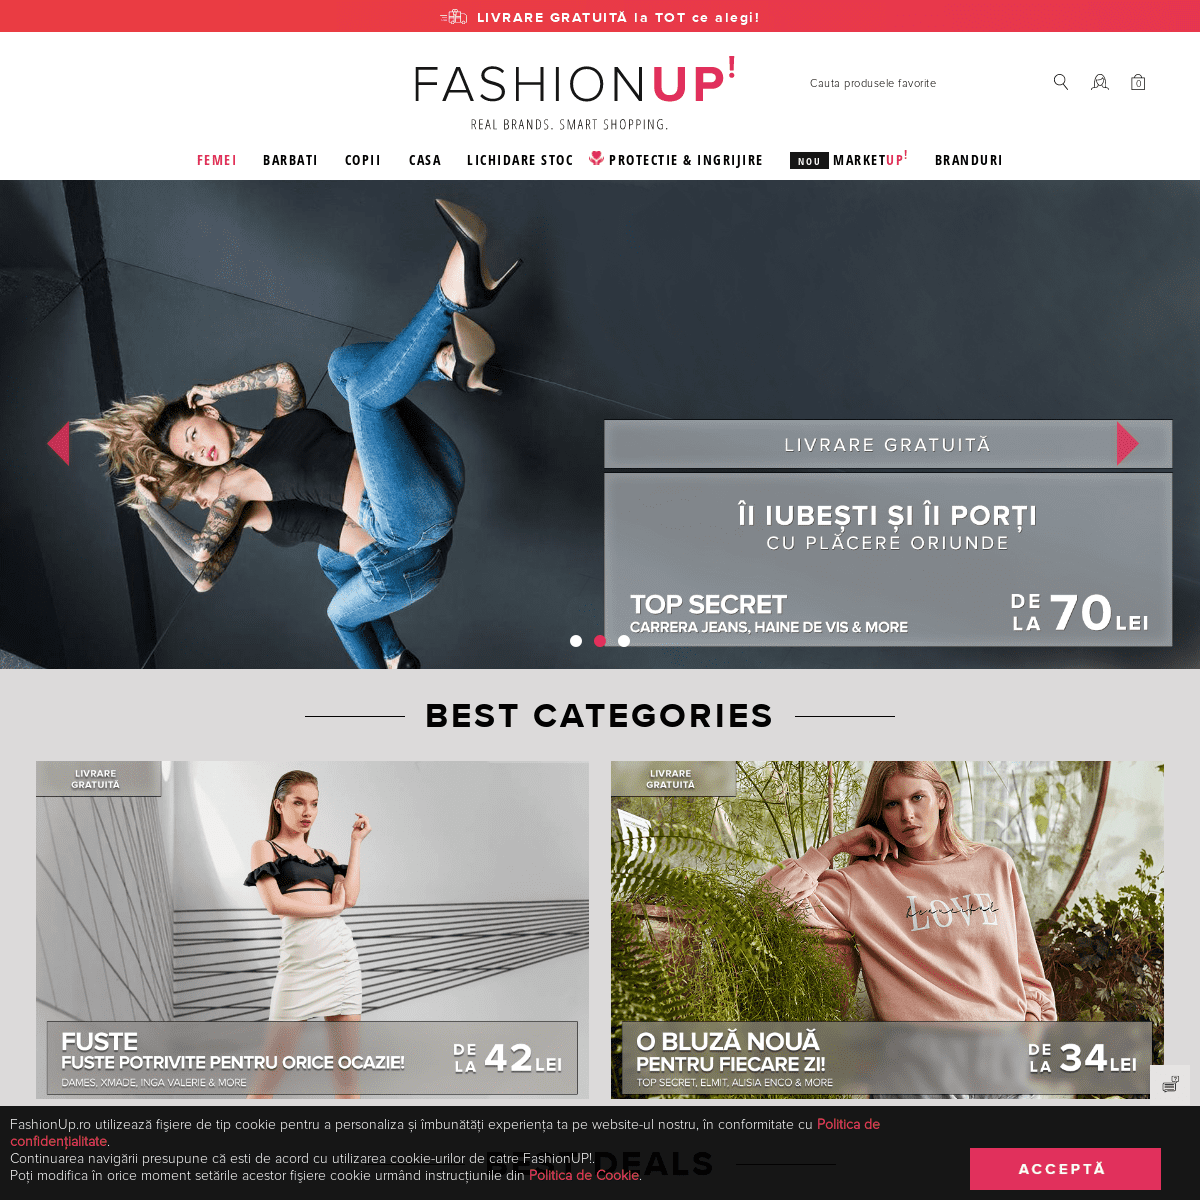 A complete backup of https://fashionup.ro